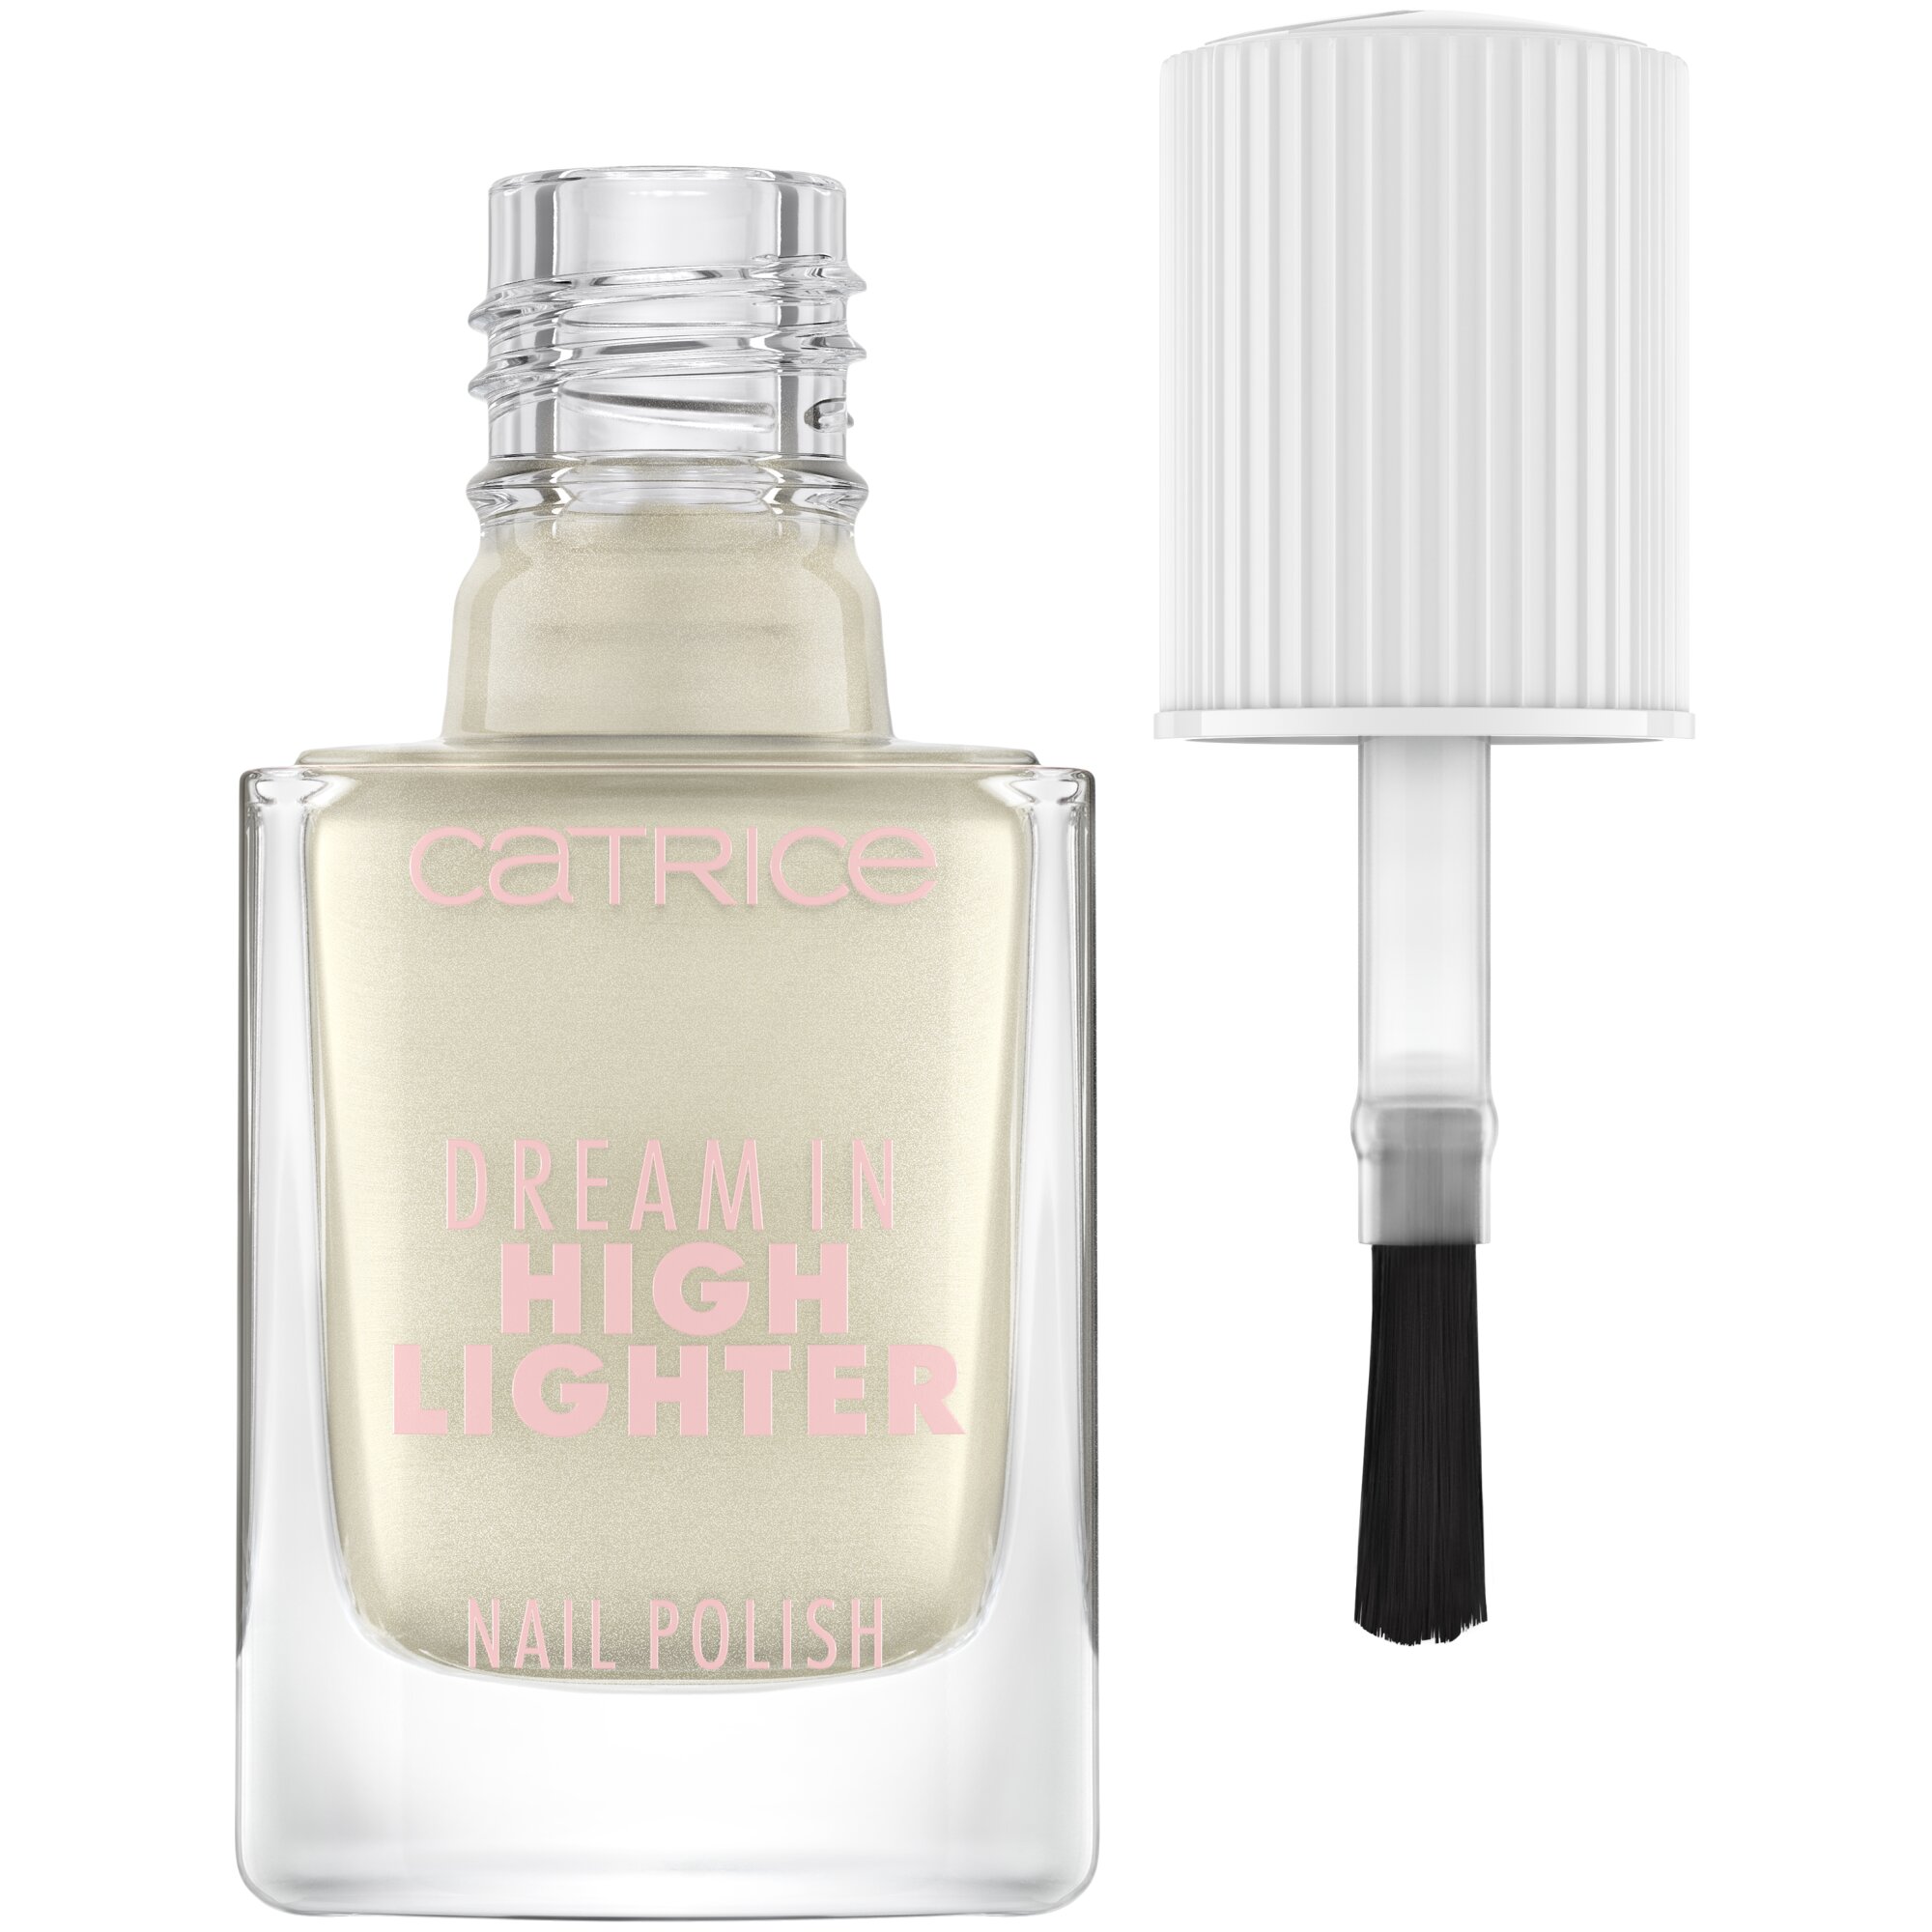 Lac pentru unghii Dream In Highlighter, 070 - Go With The Glow, 10.5 ml, Catrice